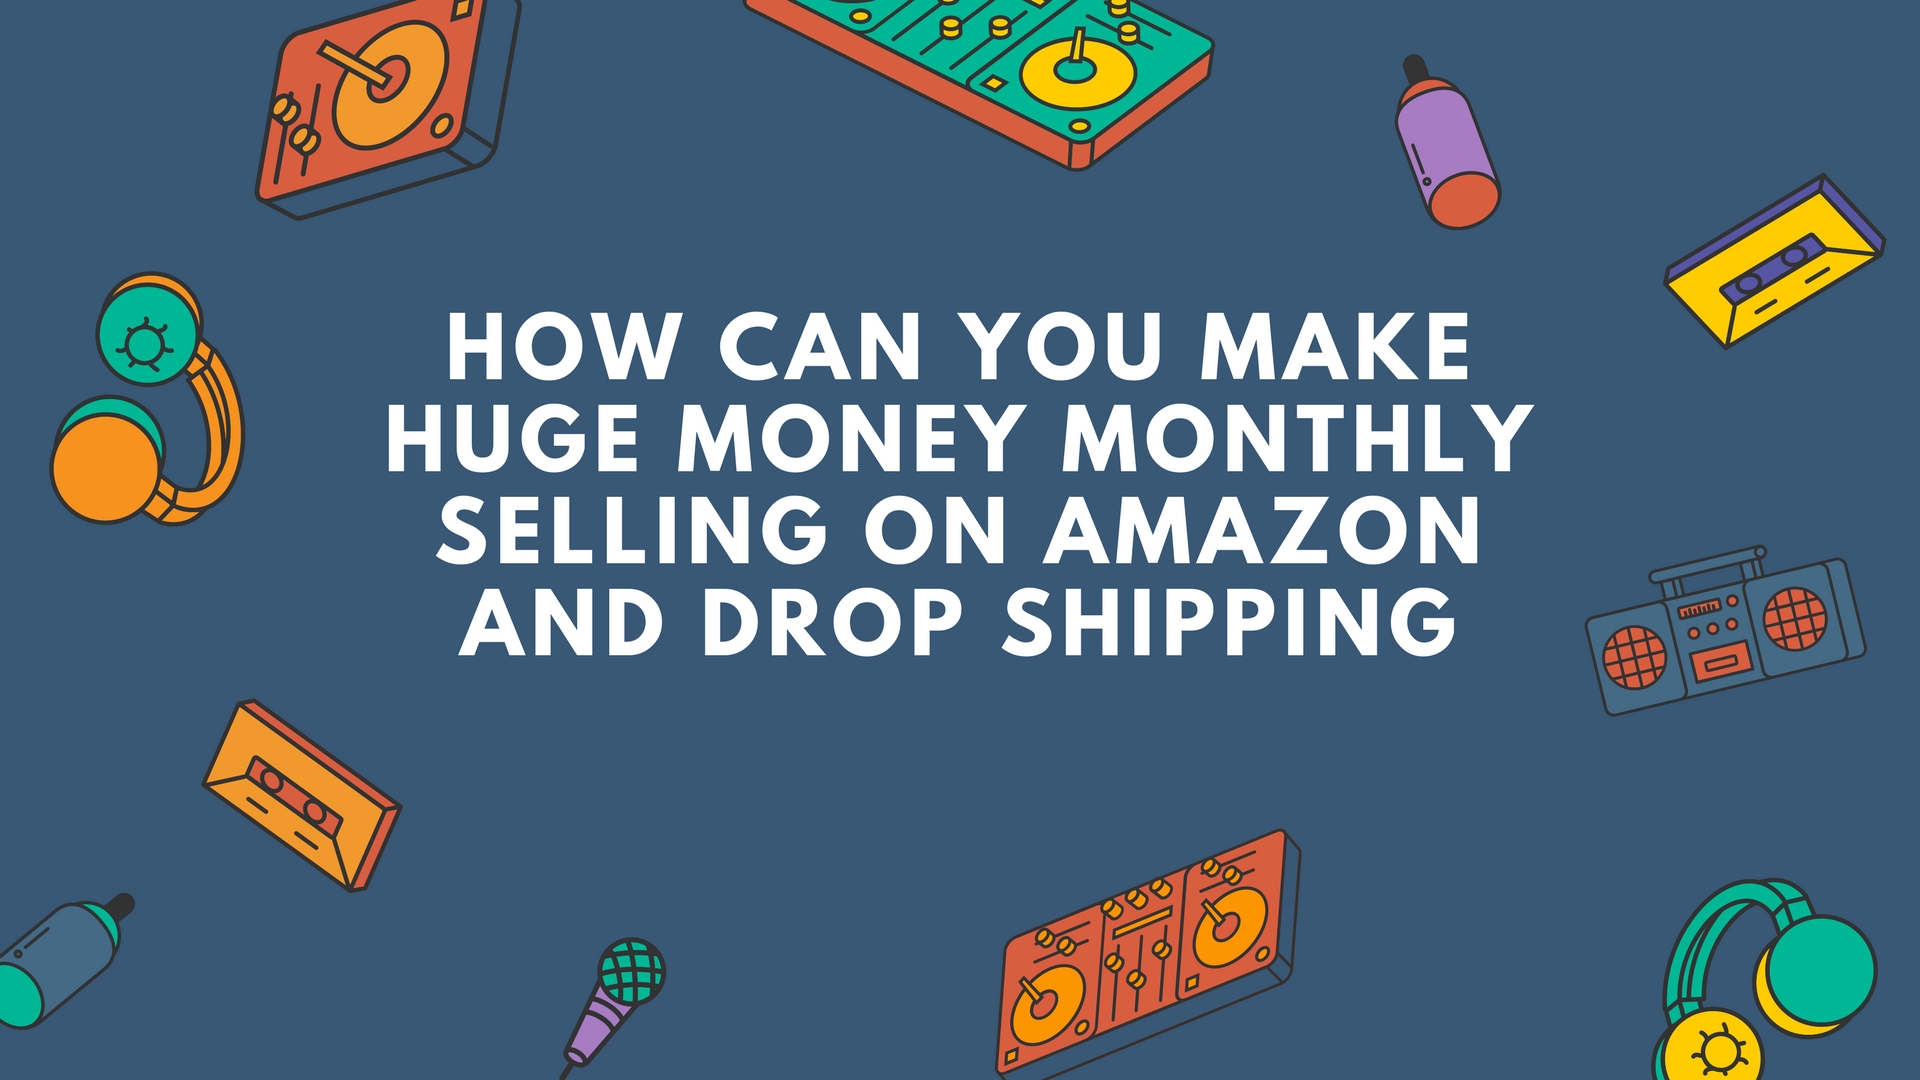 How to make huge money using Amazon and drop shipping